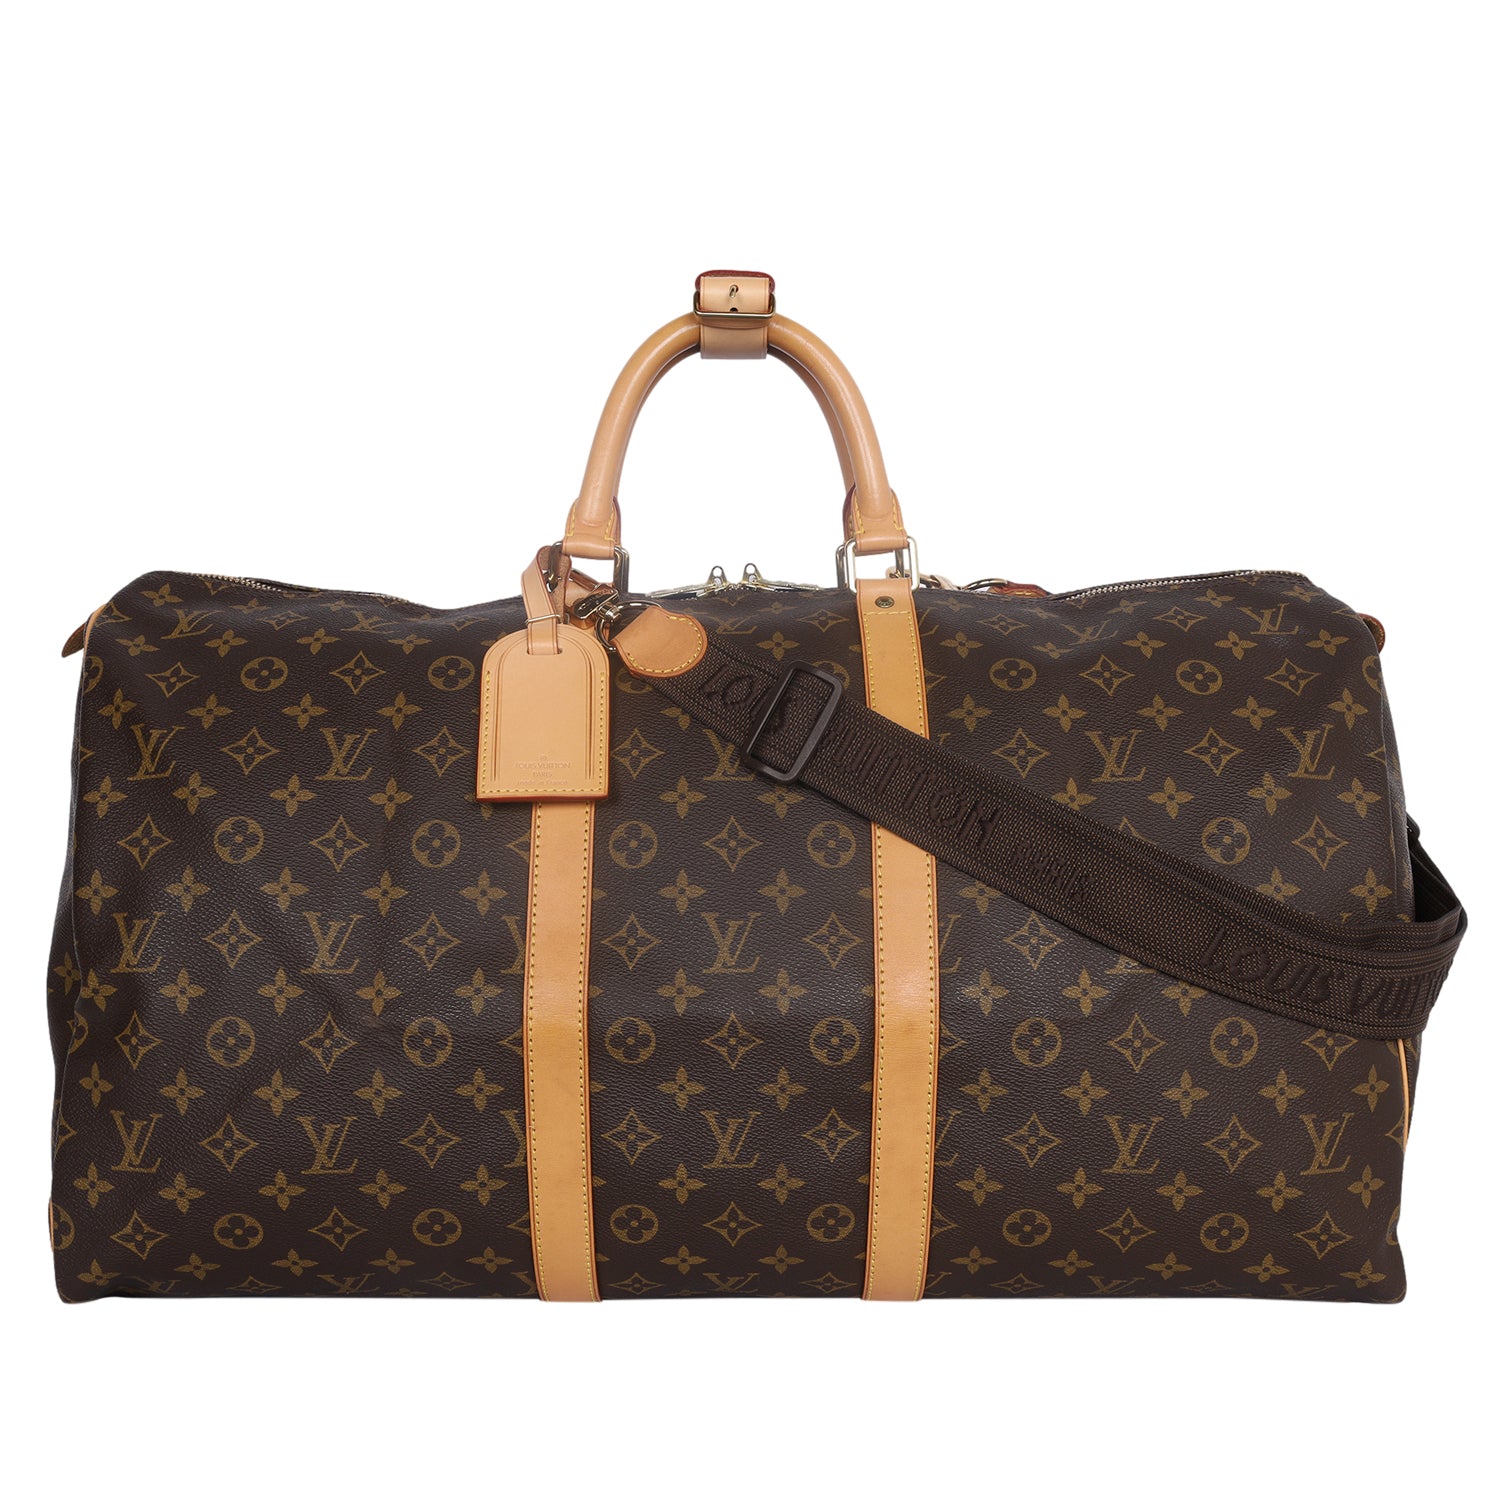 Sold x RARE LV America's Cup Keepall 55  Louis vuitton travel bags,  Americas cup, Keepall